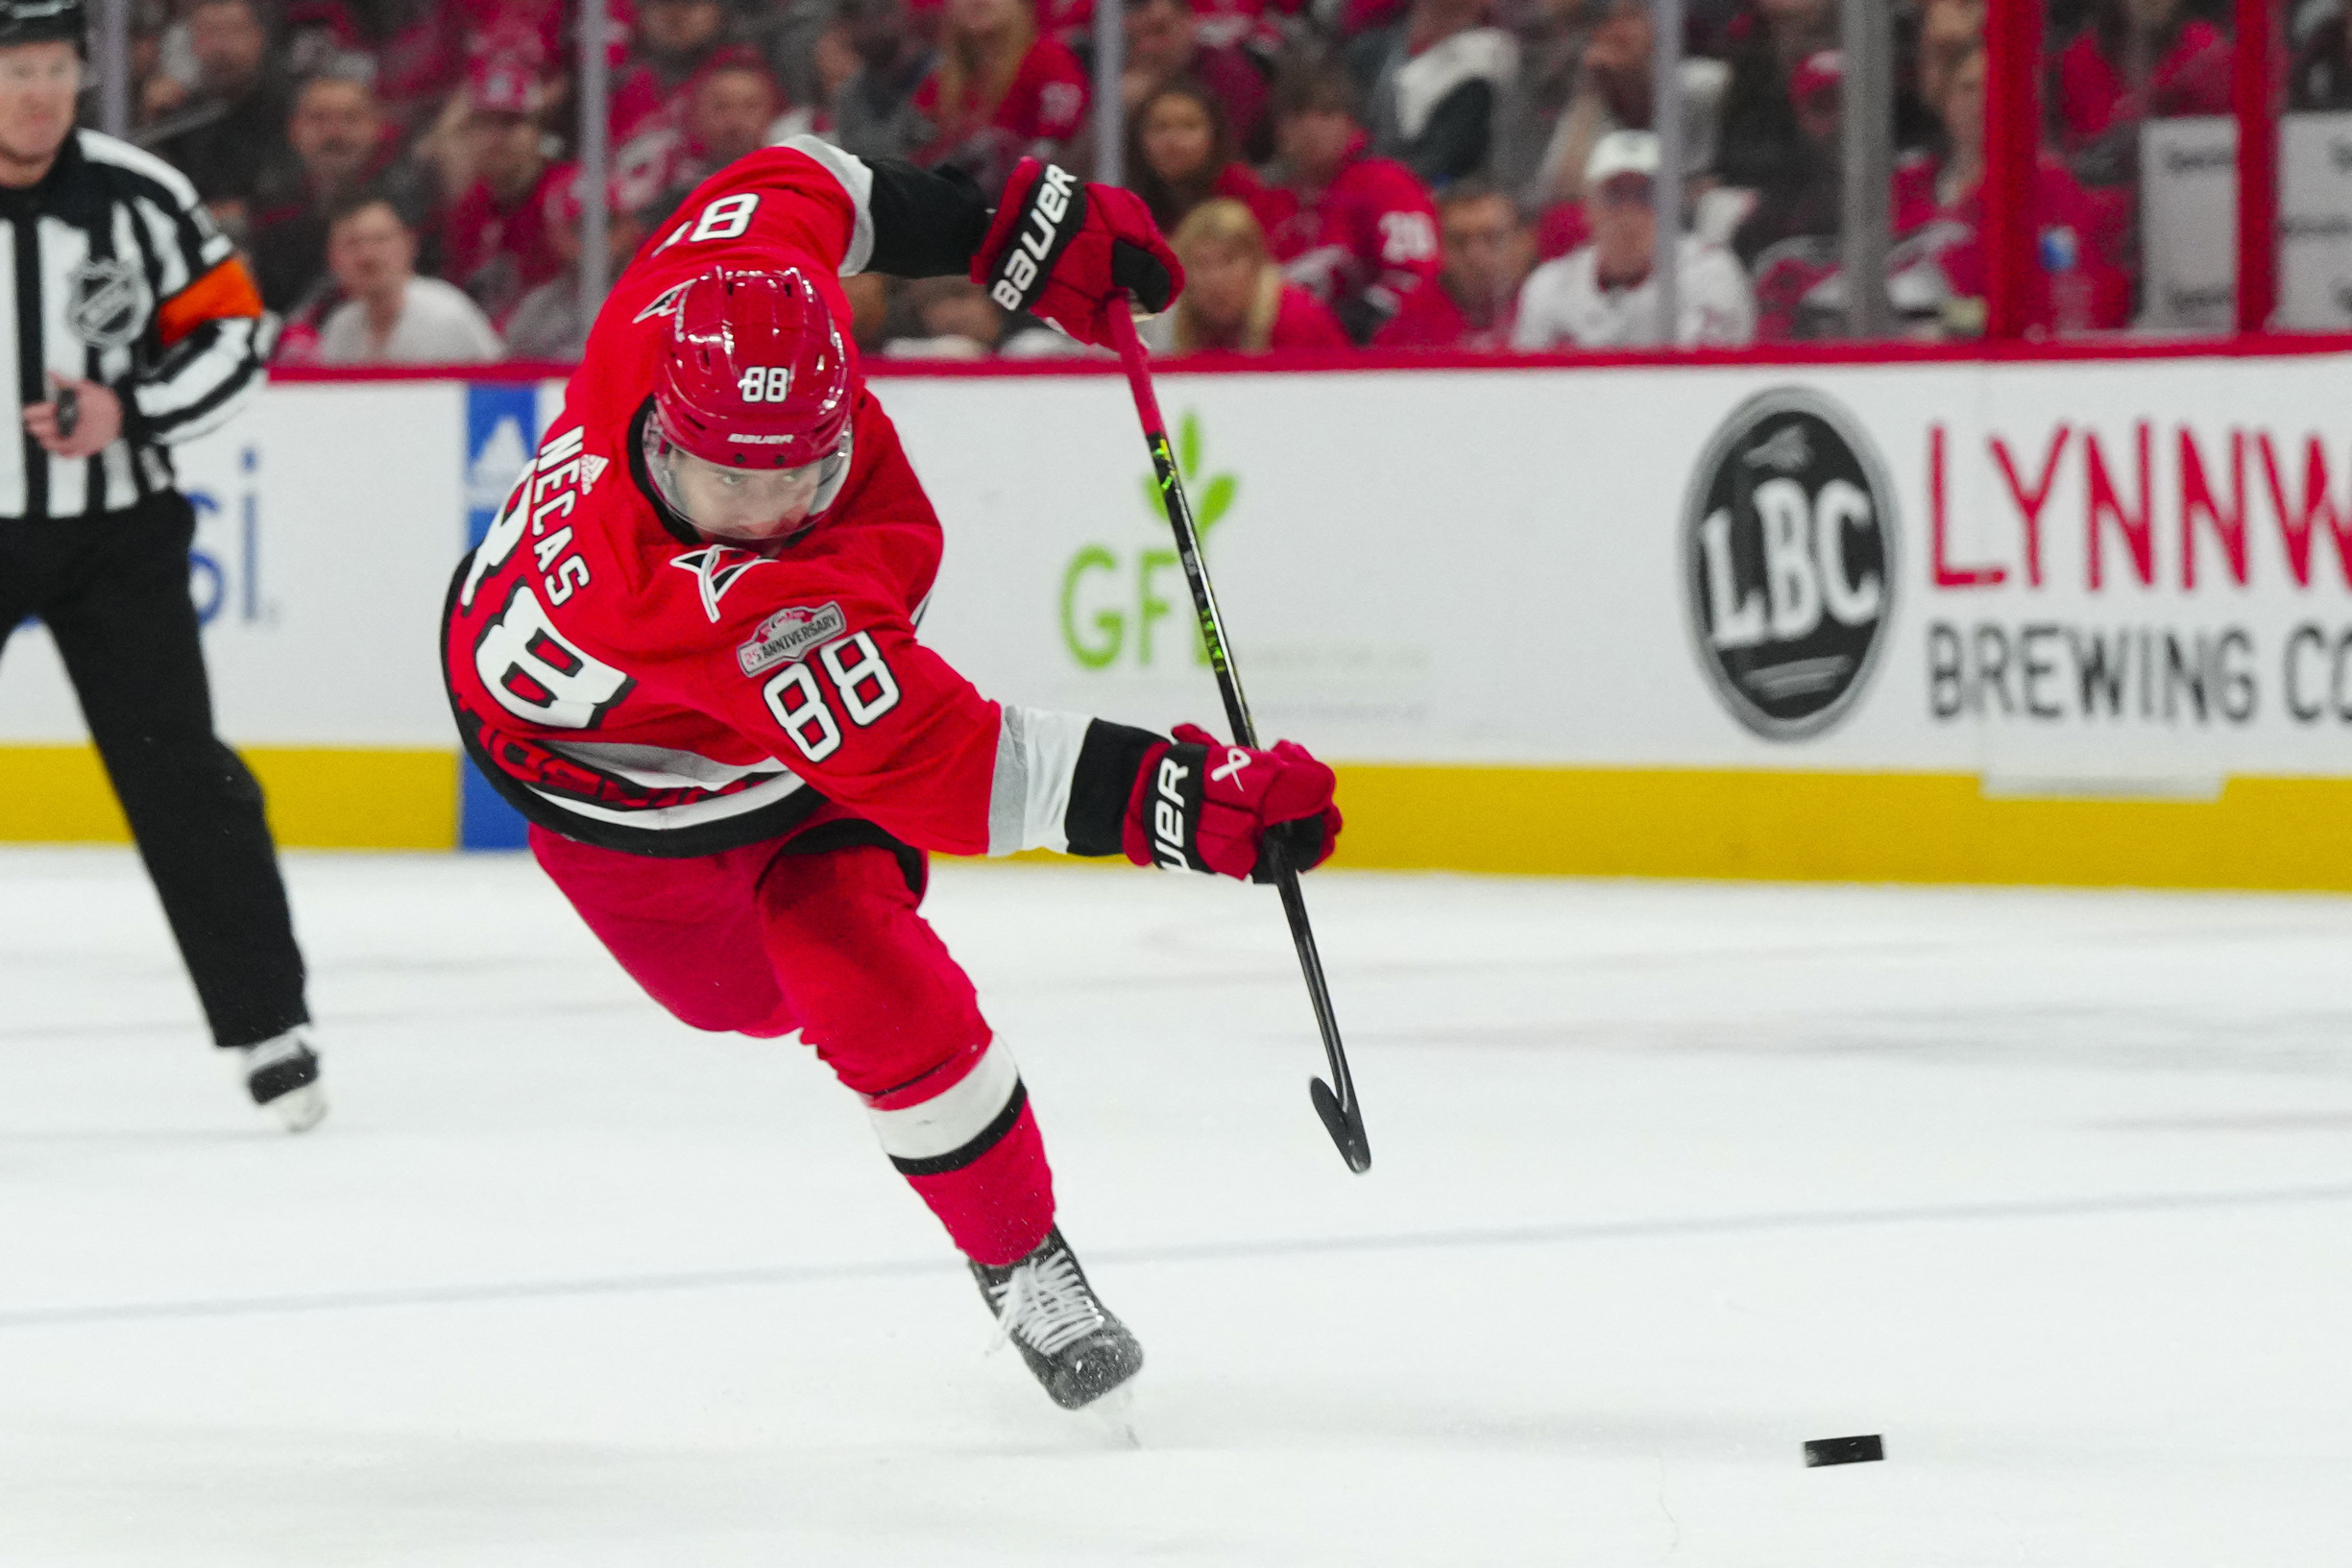 Hurricanes eliminate Devils with OT goal in Game 5